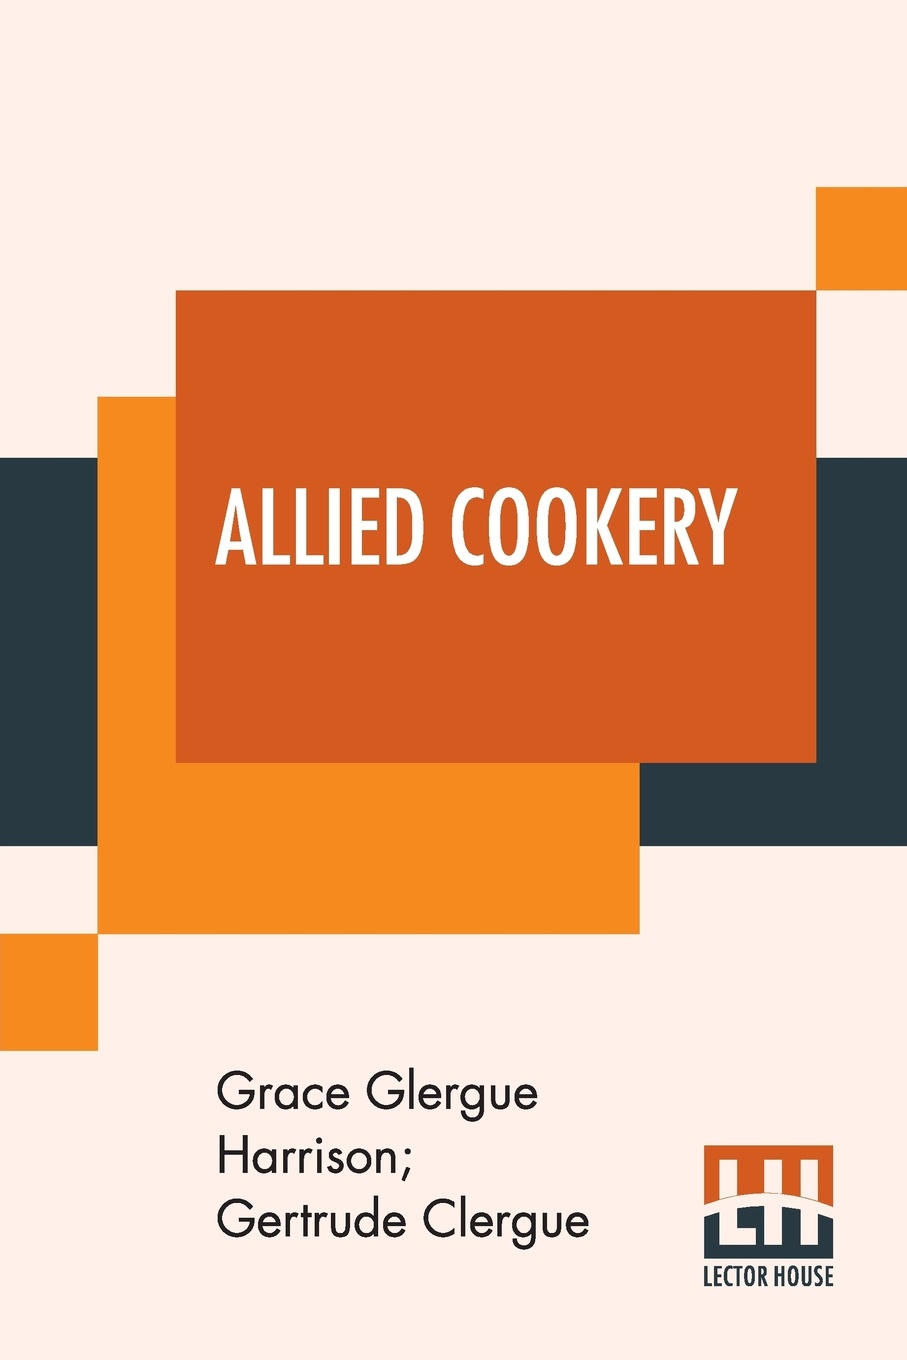 Allied Cookery. Arranged By Grace Clergue Harrison And Gertrude Clergue To Aid The War Sufferers In The Devastated Districts Of France; Introduction By Hon. Raoul Dandurand; Prefaced By Stephen Leacock And Ella Wheeler Wilcox